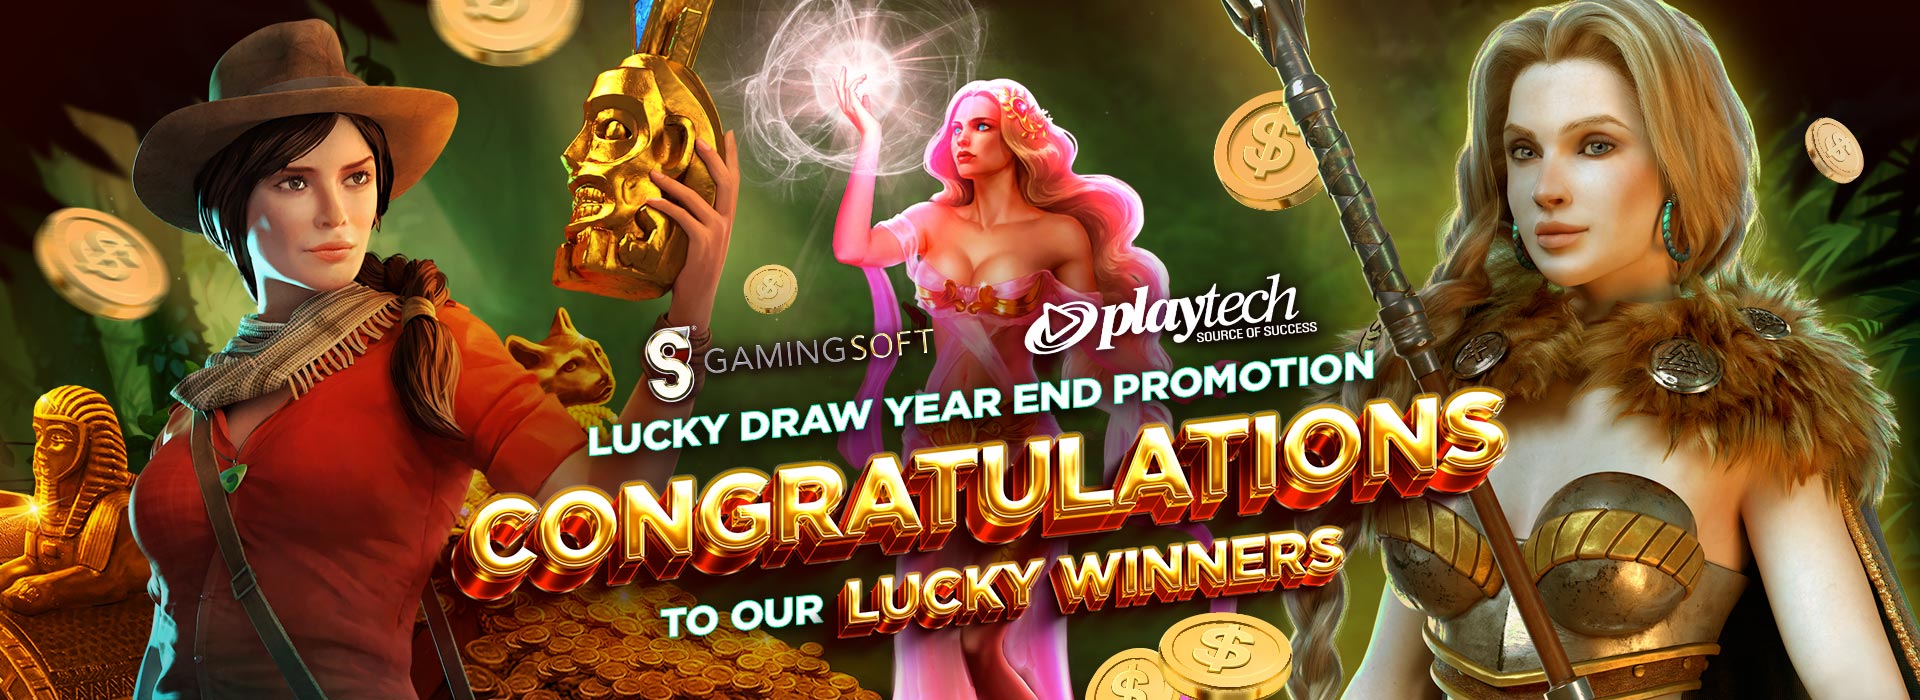 Congratulations! “GamingSoft - Playtech Lucky Draw Year End Promotion” Draw 3 Winner Announcement 